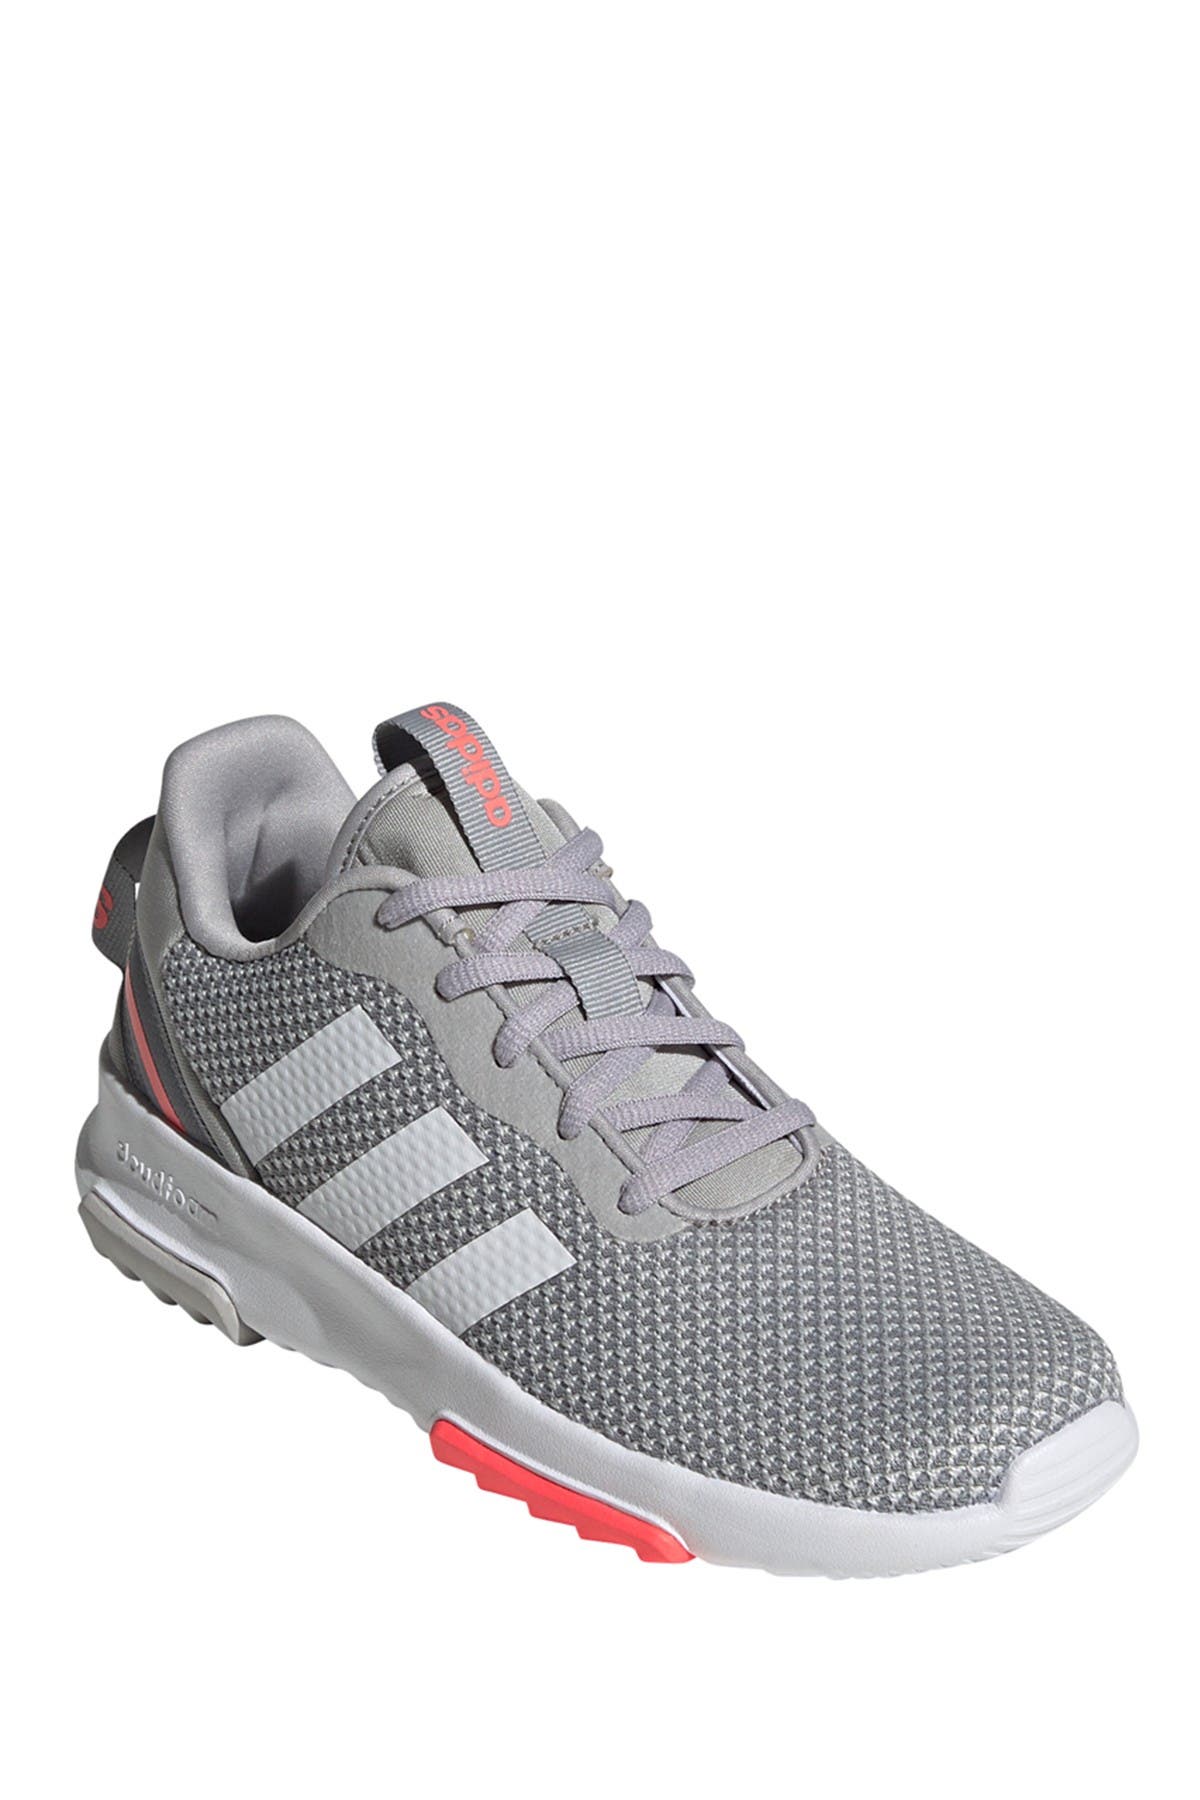 adidas racer tr running shoes